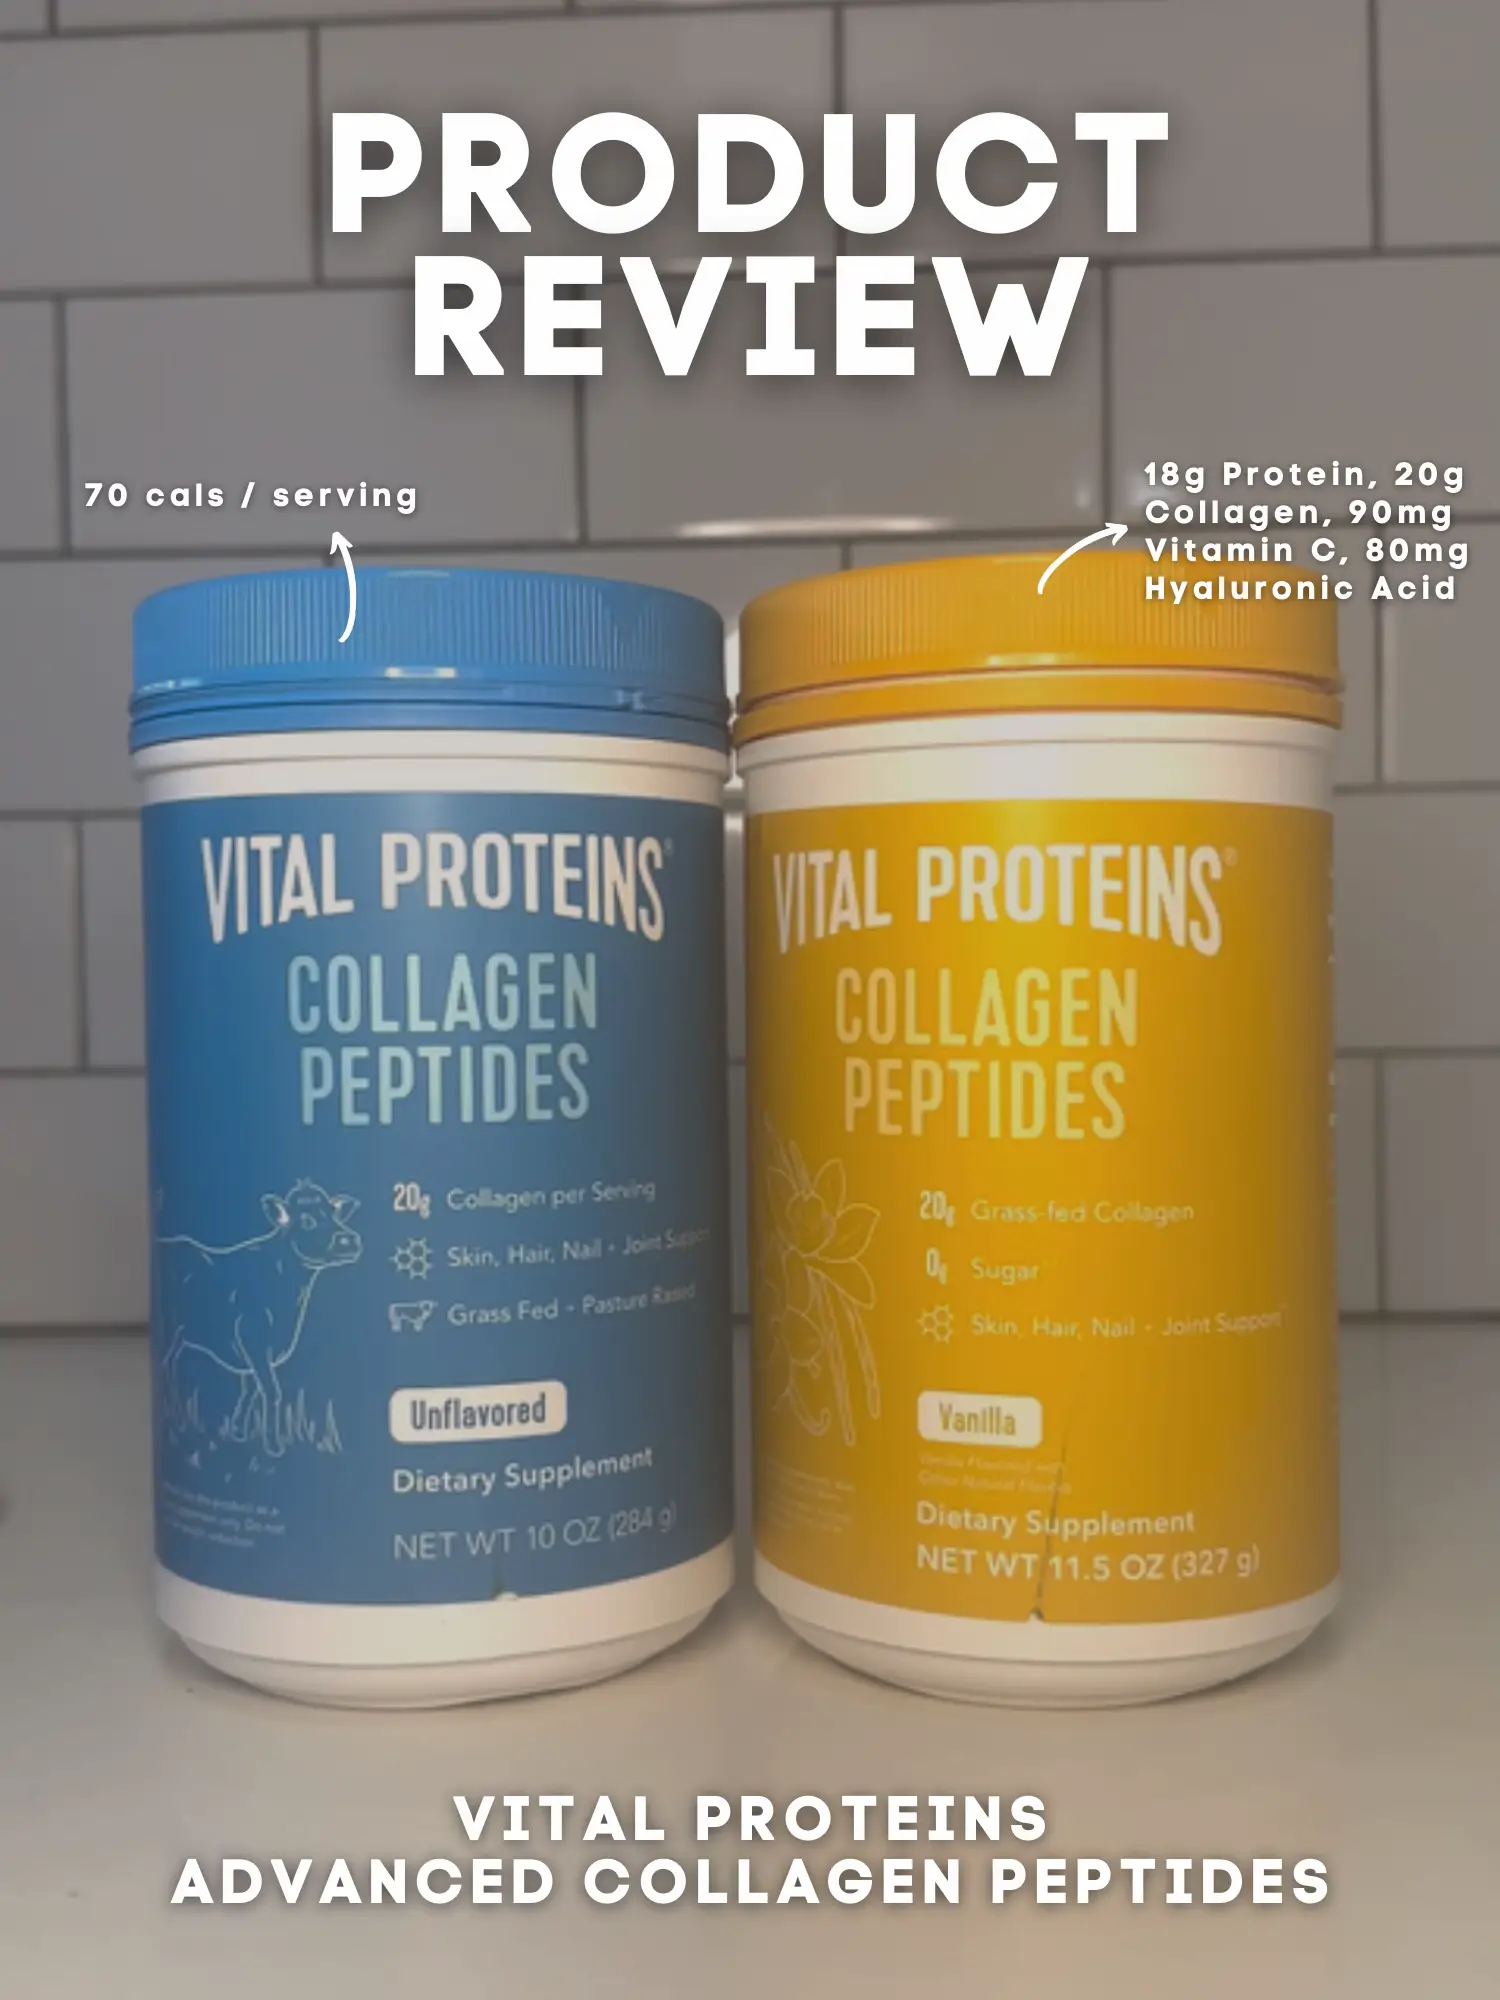 Bloom Nutrition Overhaul & Review! 💪🏼🌟  Protein Powder, Pre Workout,  Creamer, Vitamins and more! 🌟 